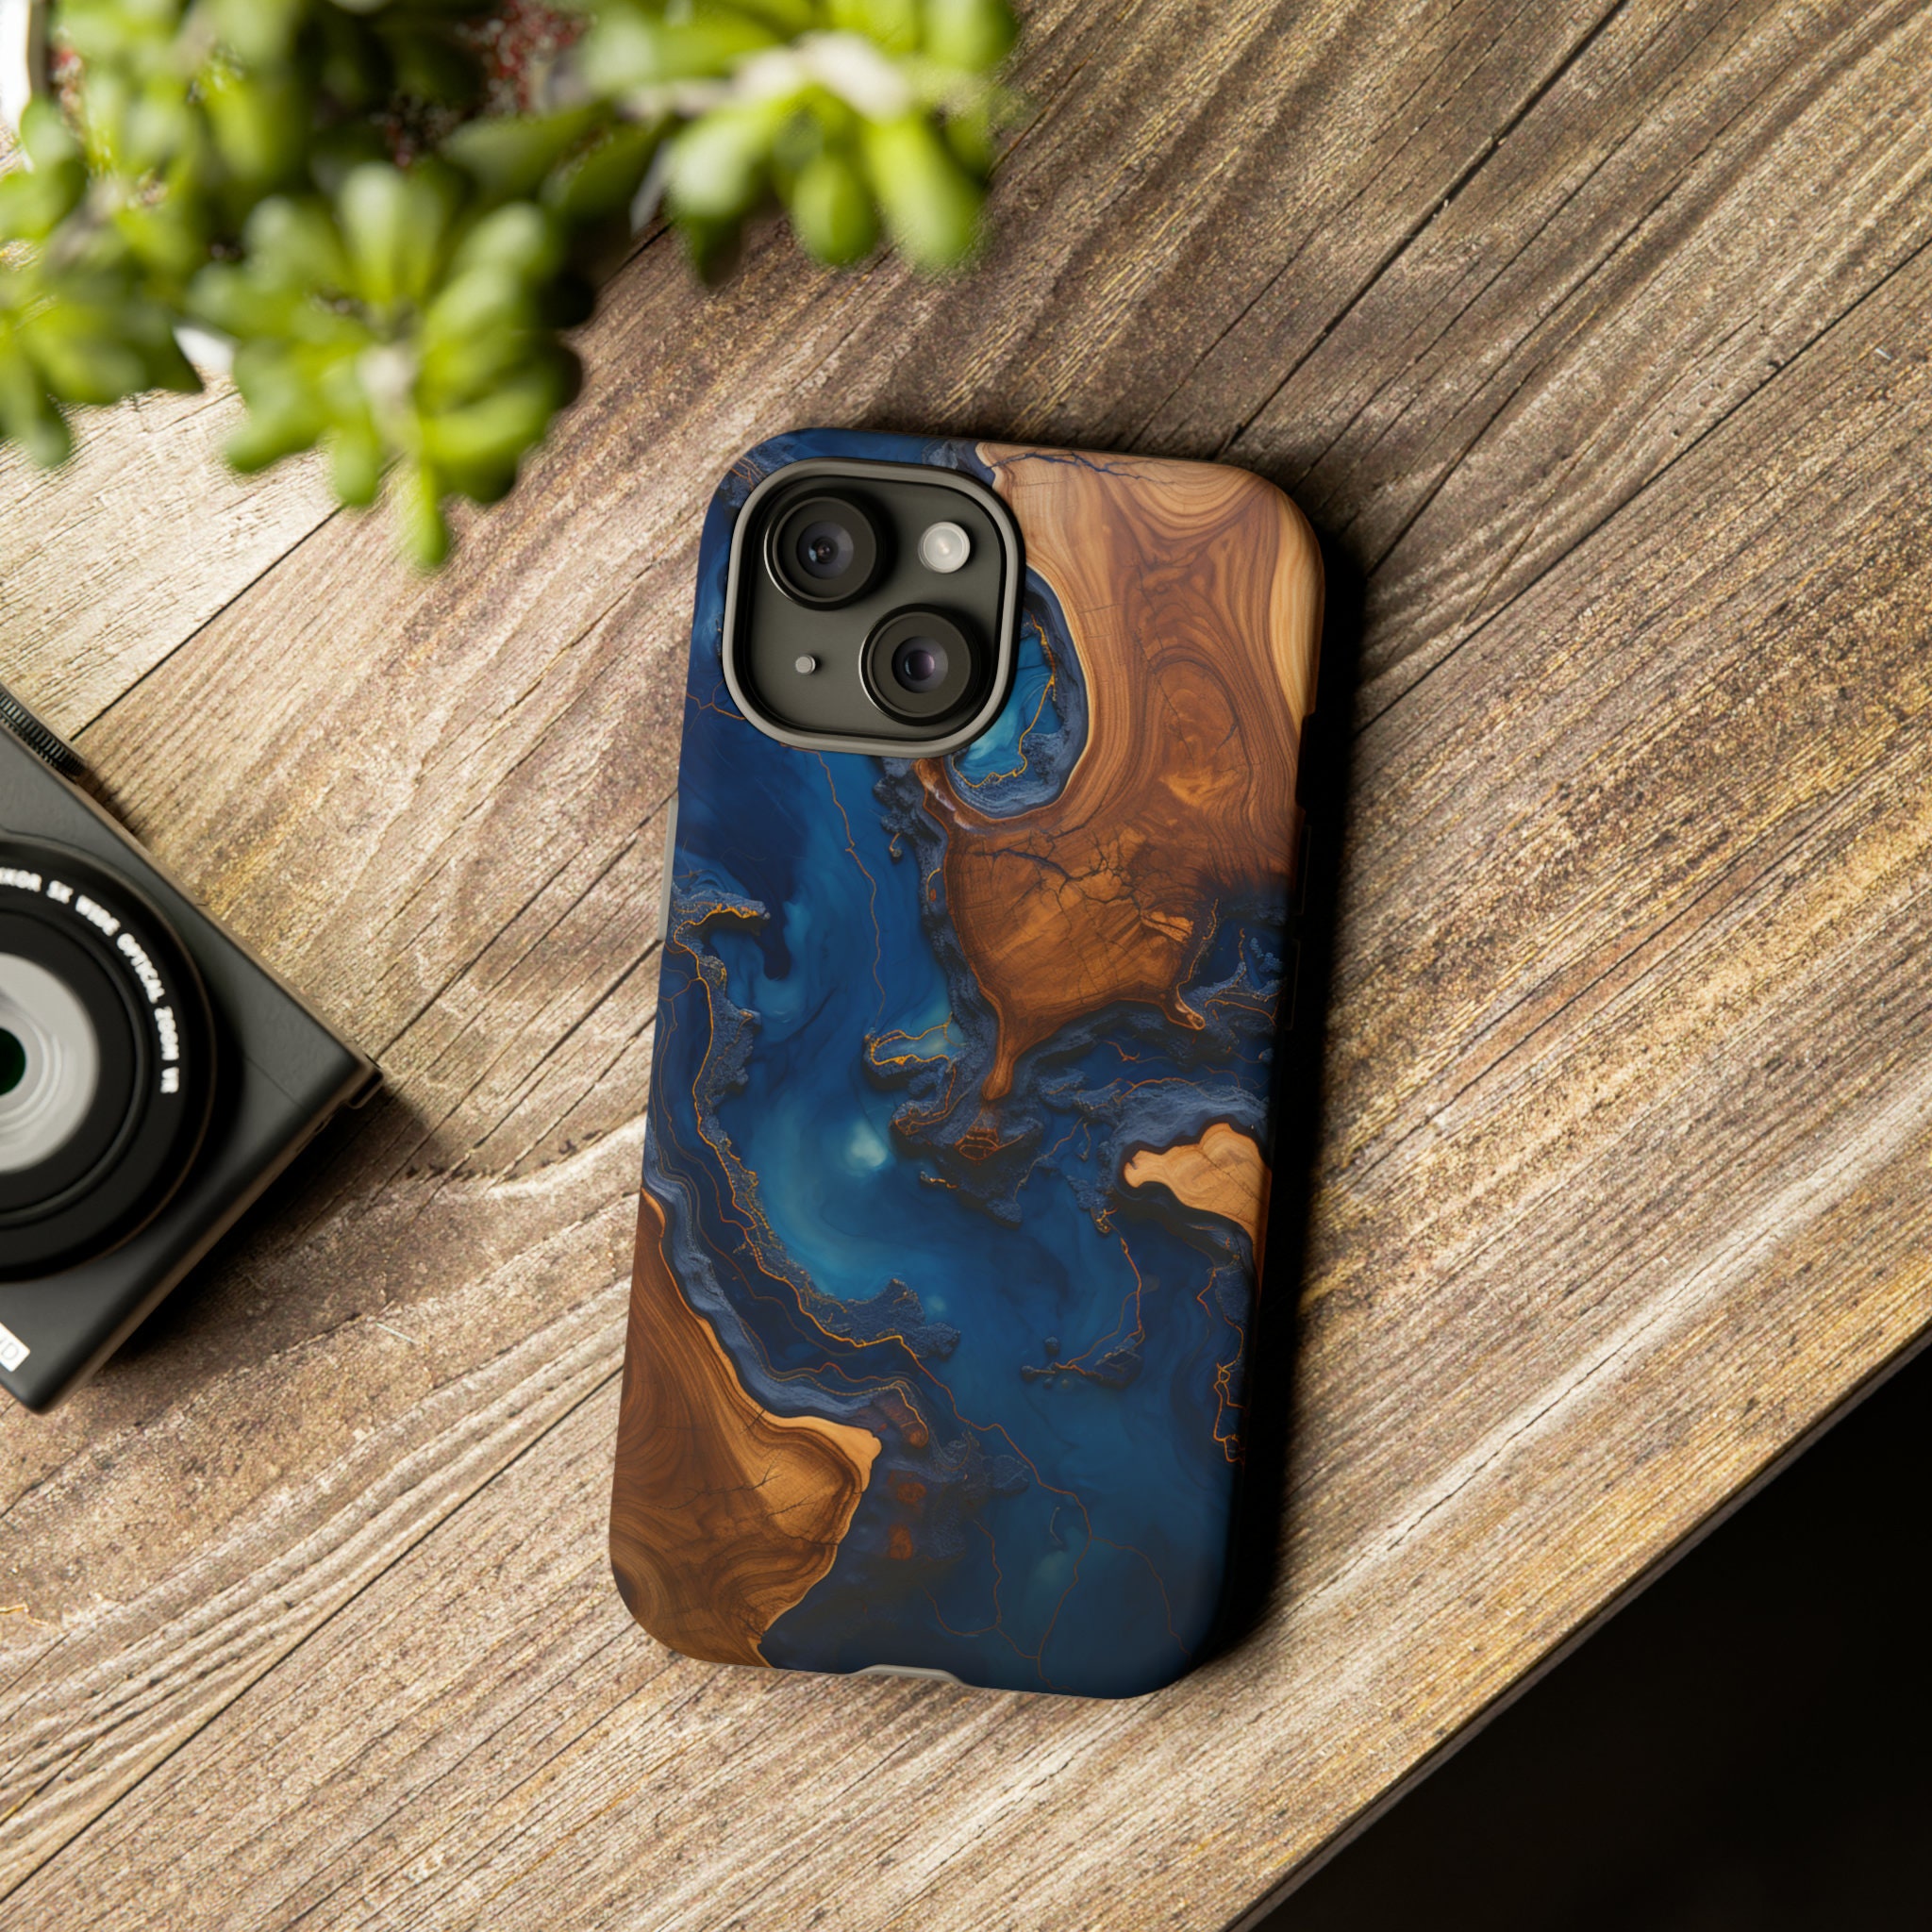 iPhone 13 case with wood finishing and Behemoth 'CONTRA' logo